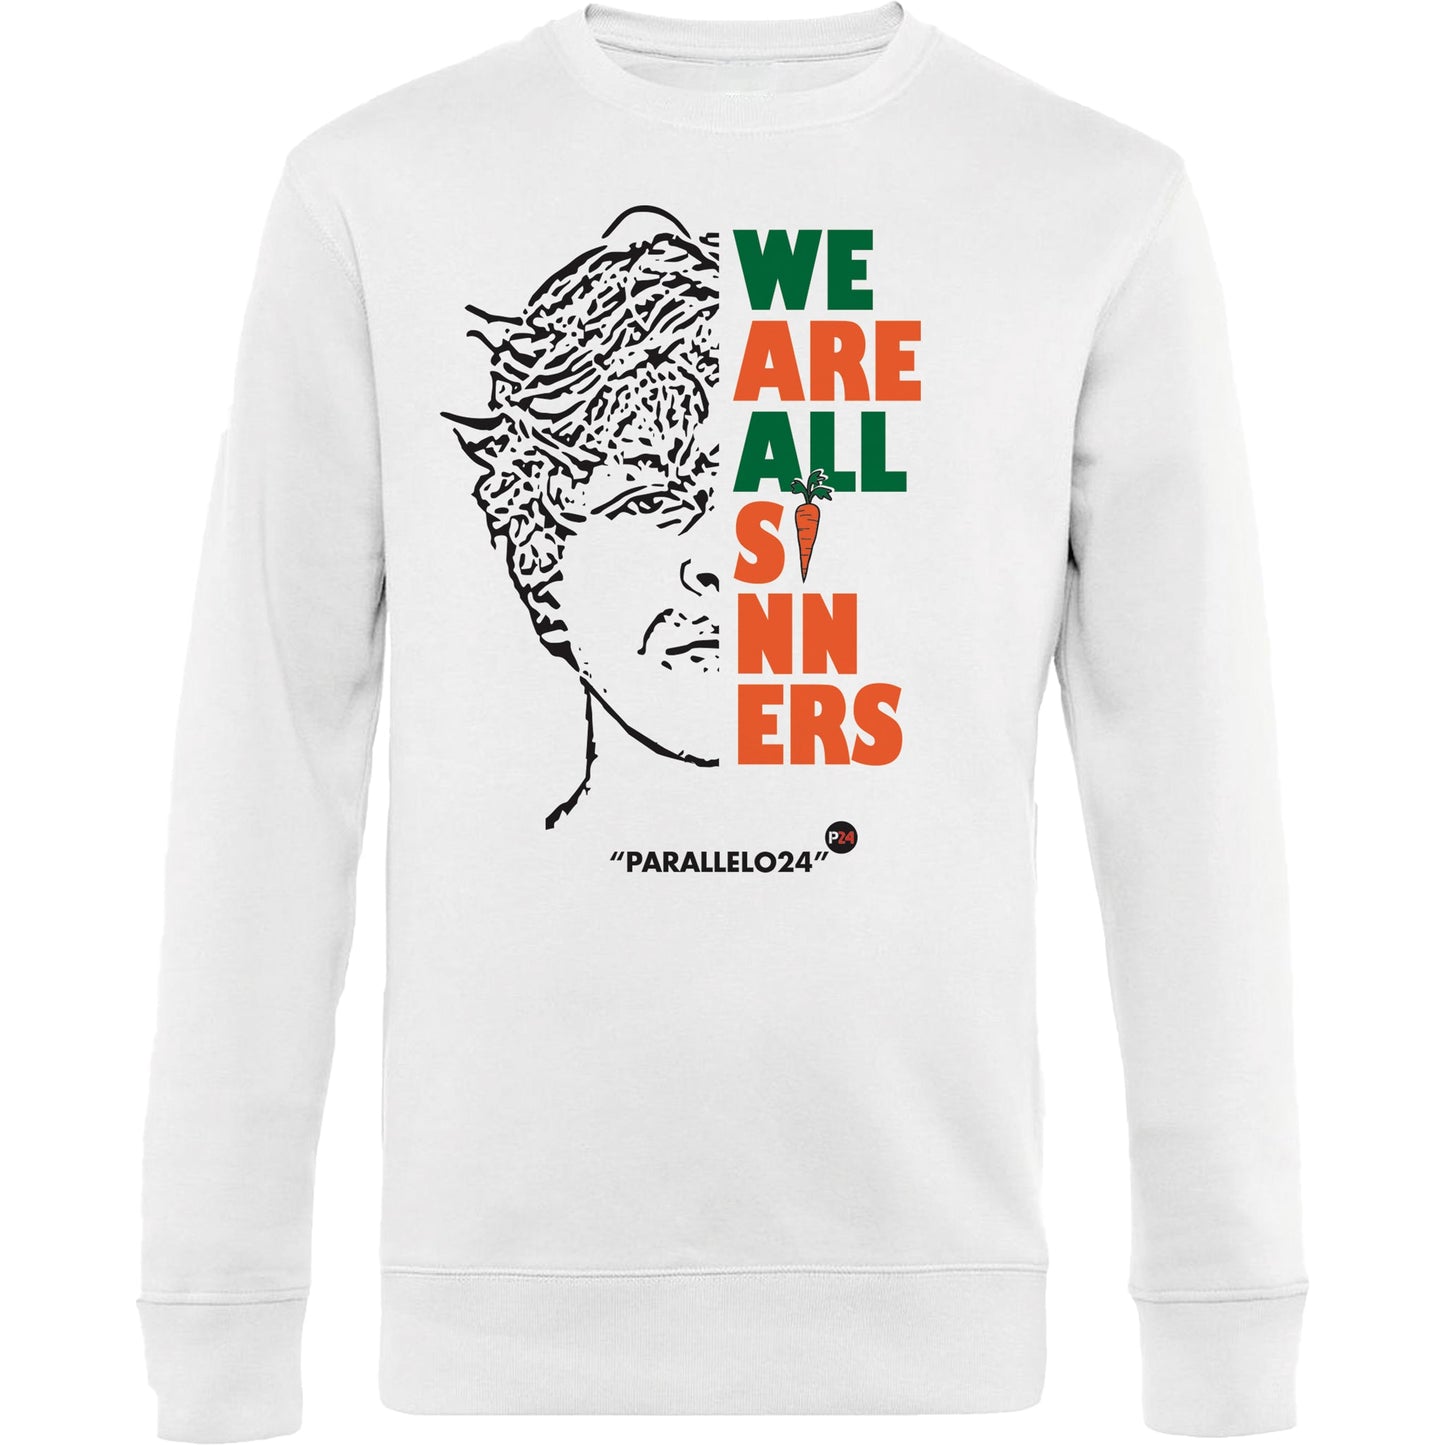 "We Are All Sinners" Parallelo24